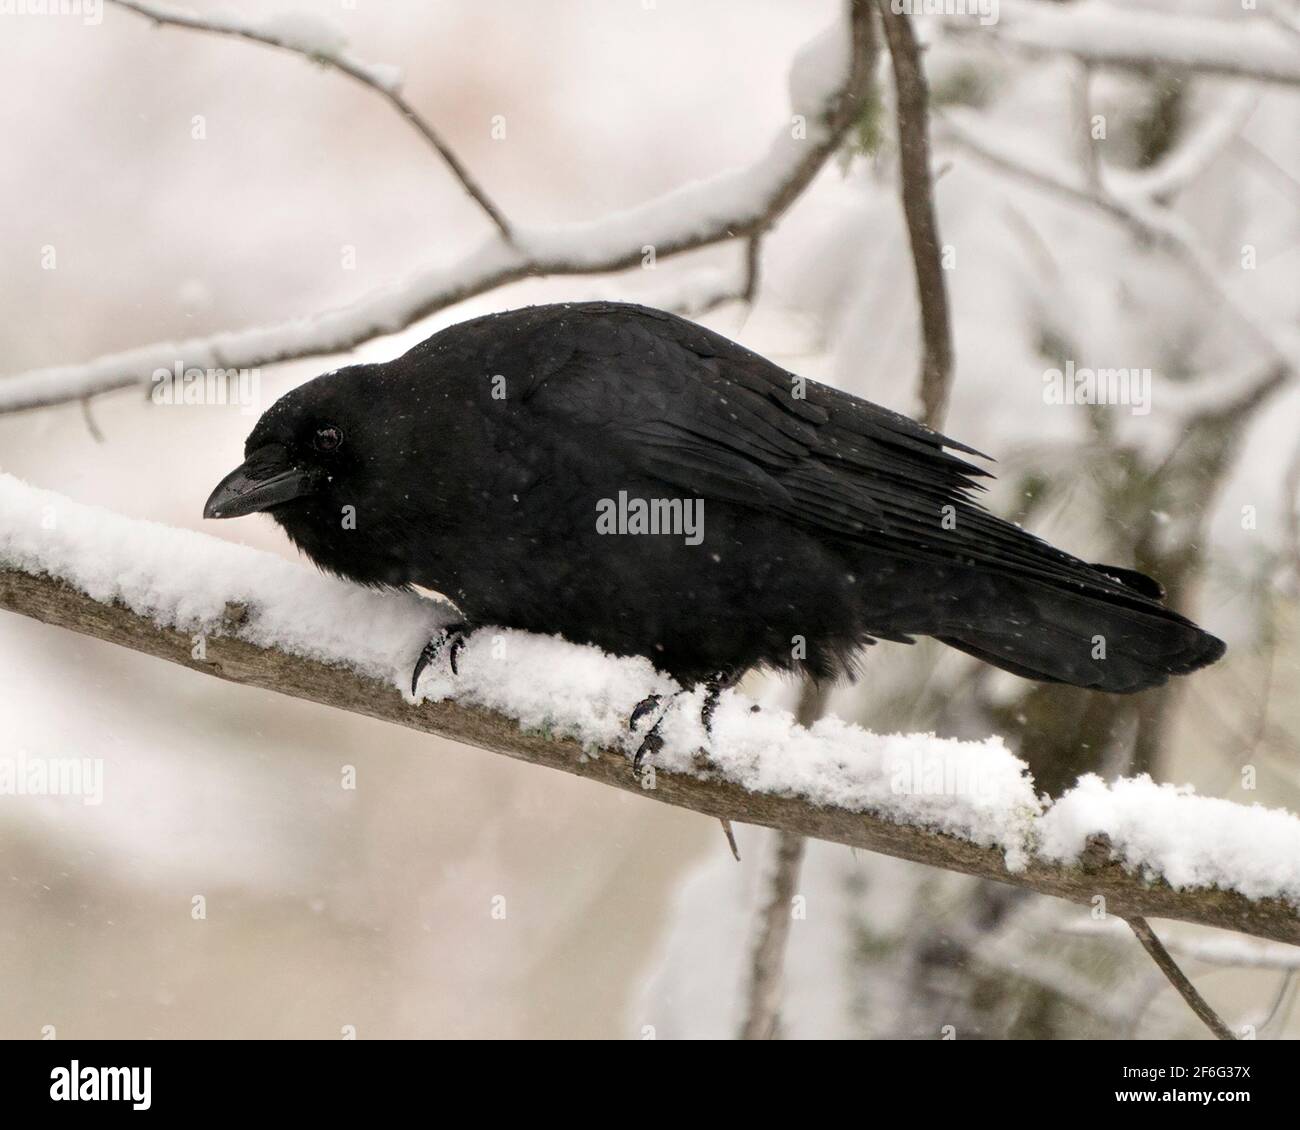 Raven bird perched on a branch with snow and a blur forest background with falling snow on its black feathers enjoying its environment and habitat. Stock Photo